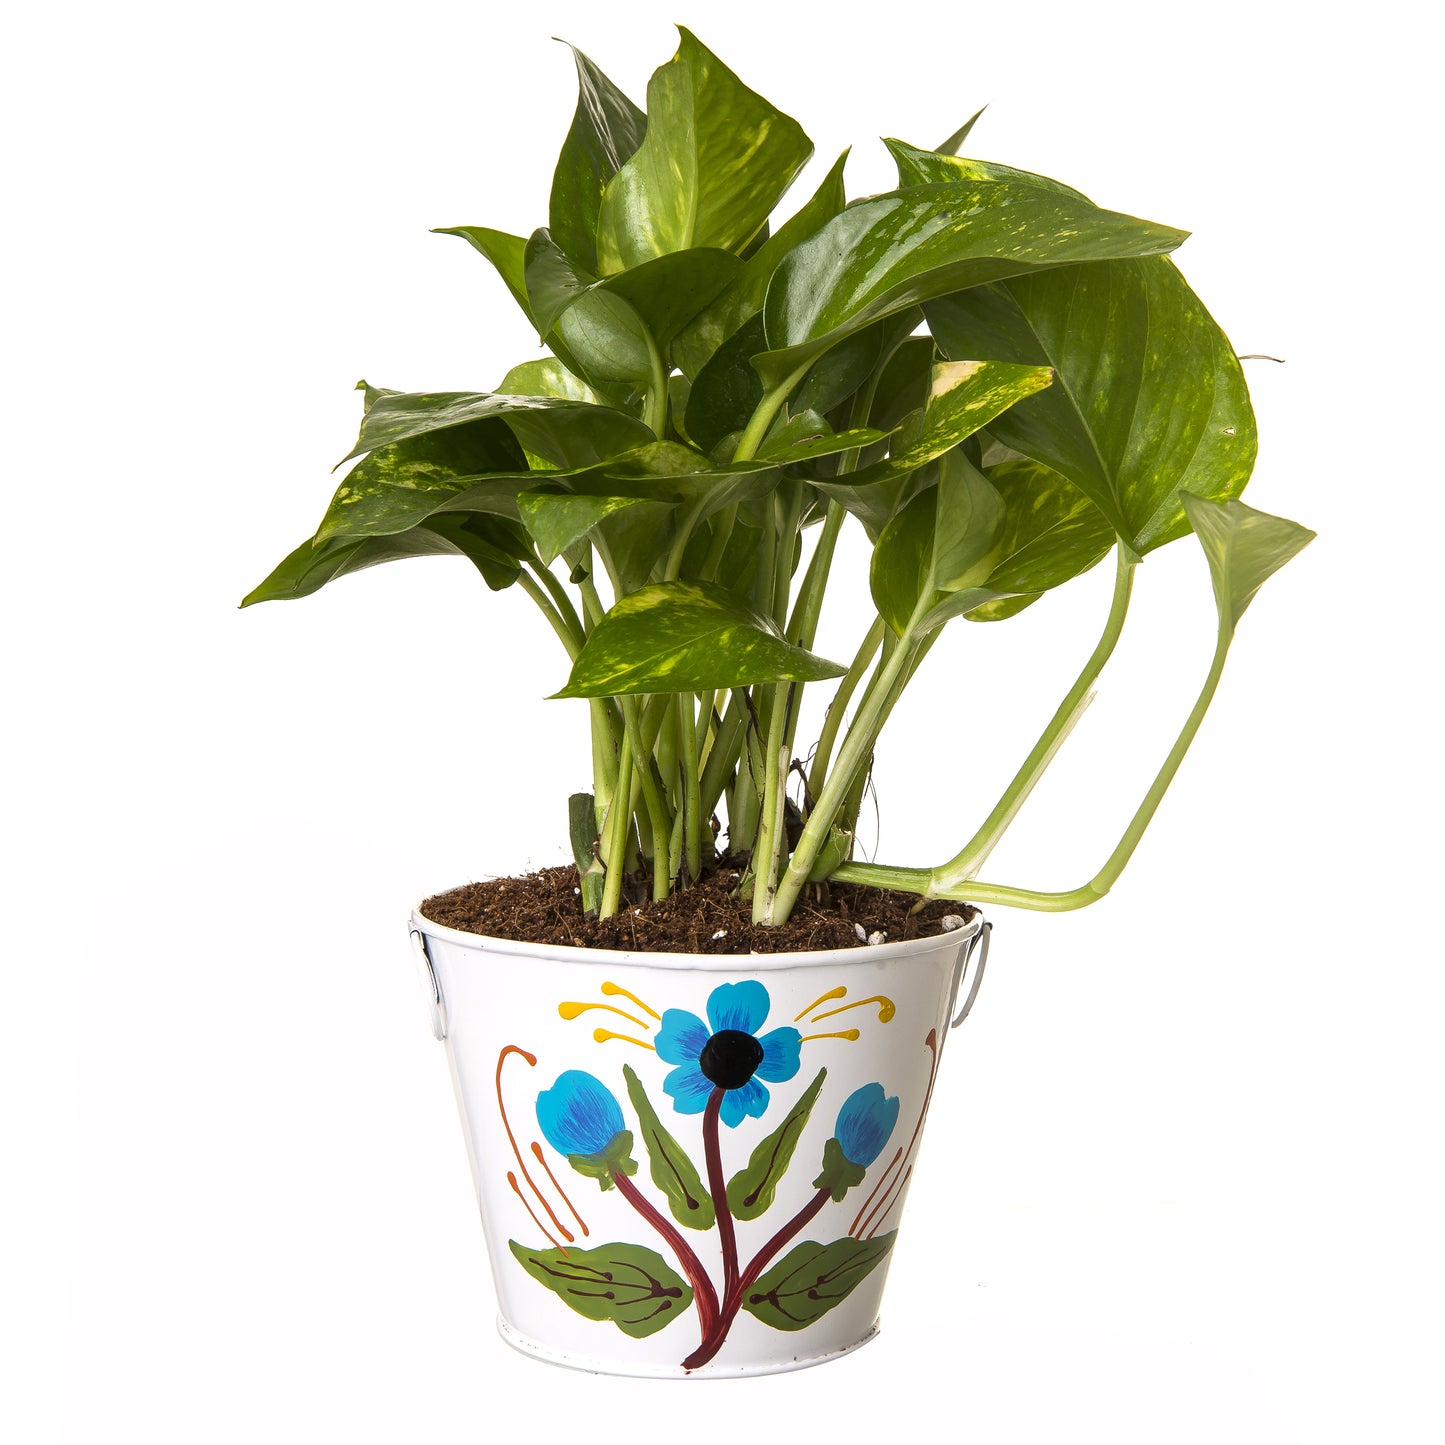 Exotic Green Beautiful Good Luck Indoor Money Plant with Floral Red Colour Metal Planter